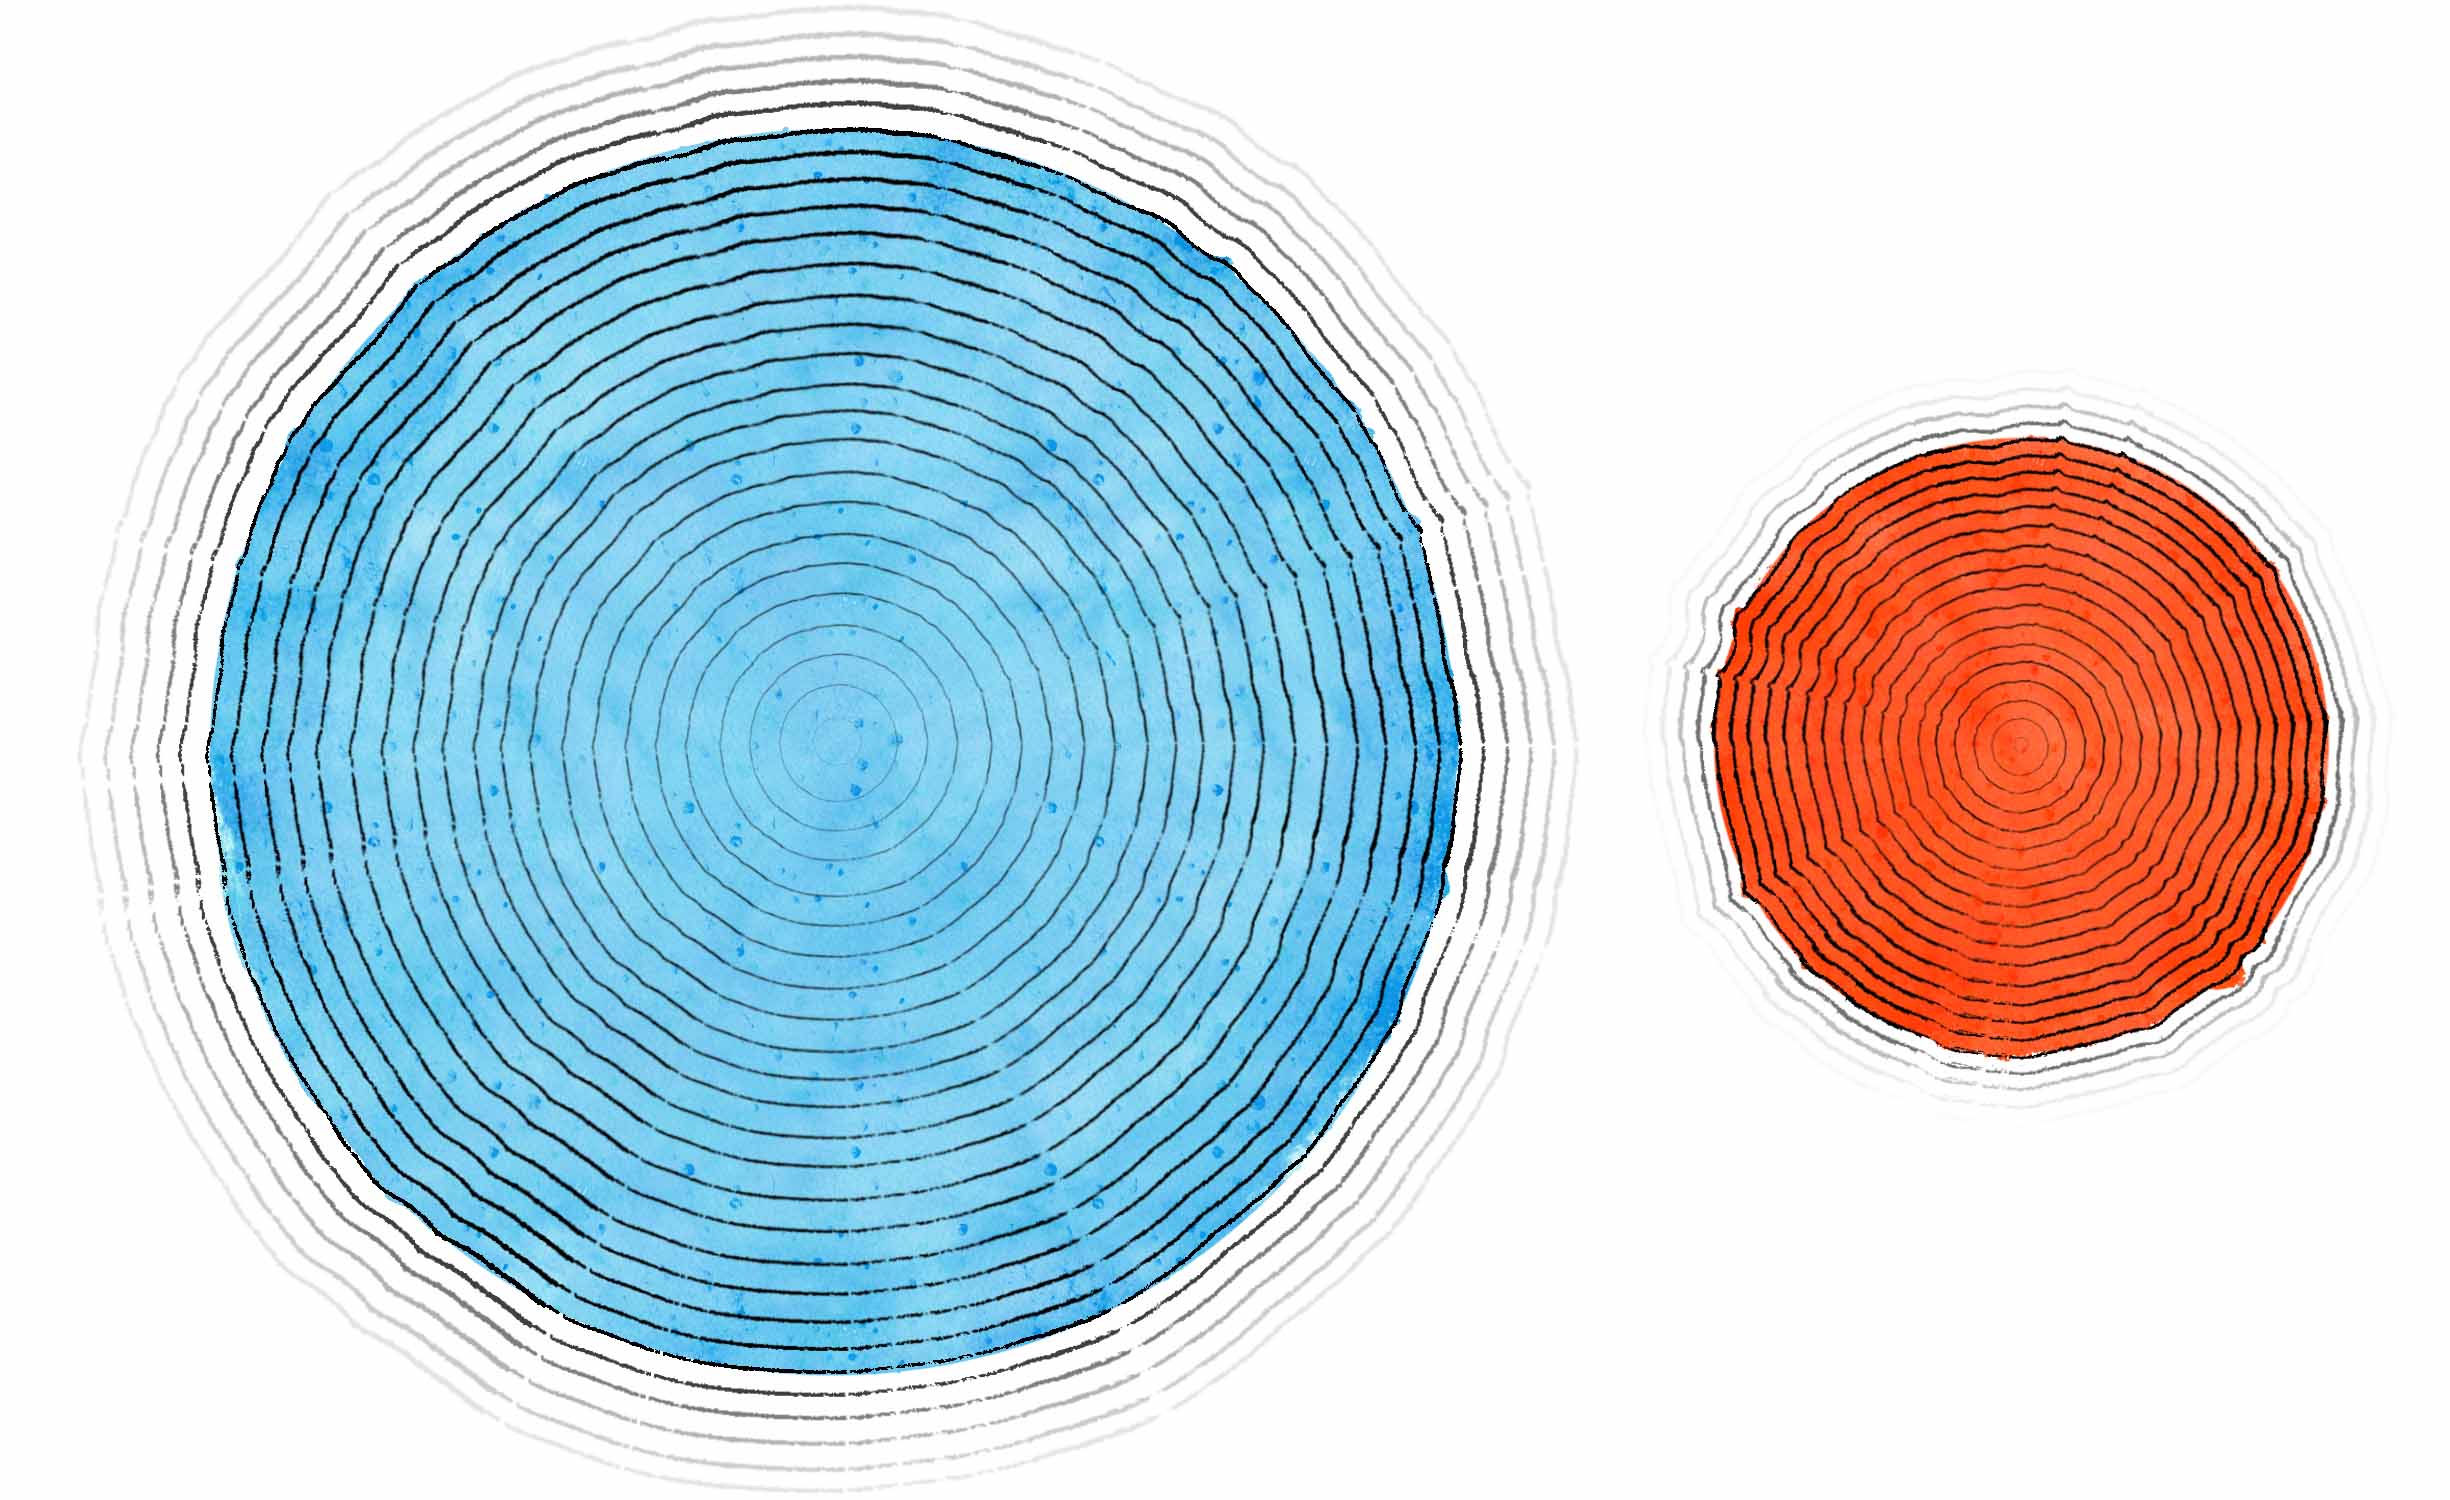 Earth and Mars ringed by concentric wobbly circles, indicating geopotential lines of decreasing strength as they move outward.